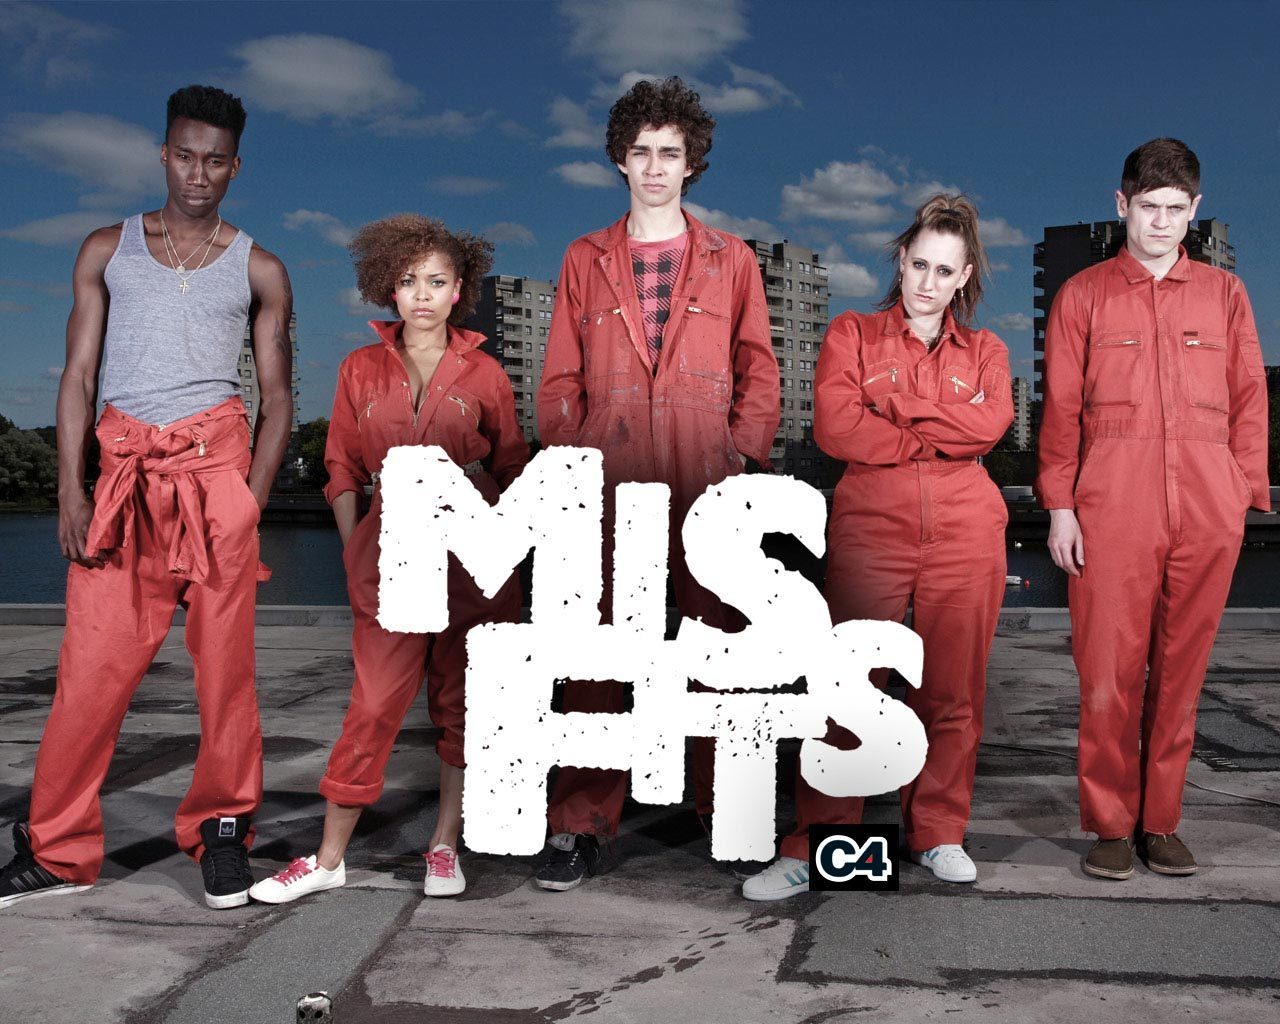 UK Girls  Lovers Of All British Things images Misfits [TV Series 1280x1024